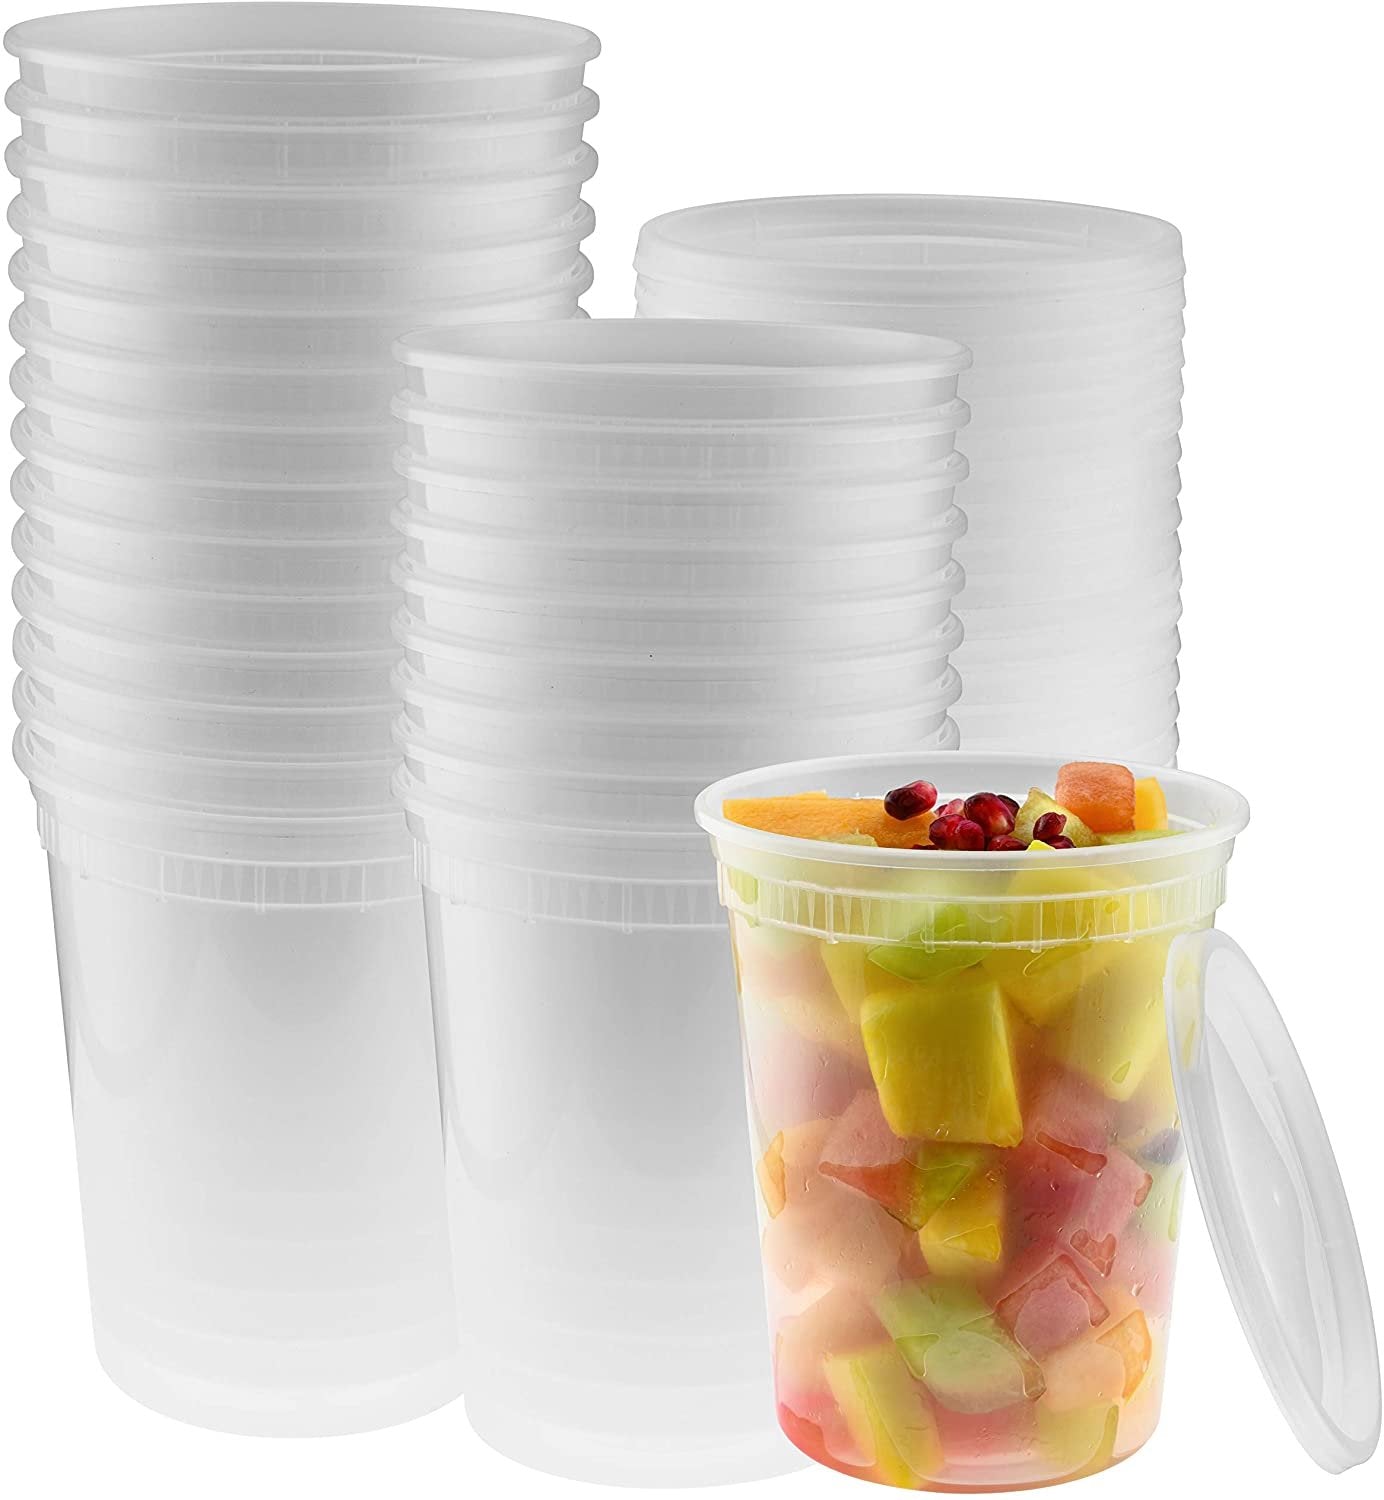 Deli Container with Lids - Food Storage - Clear Freezer, 36-Pack BPA Free  Plastic 8, 16, 32 oz, Cup Pint Quart set, Great for Soup, Meal Prep,  Portion